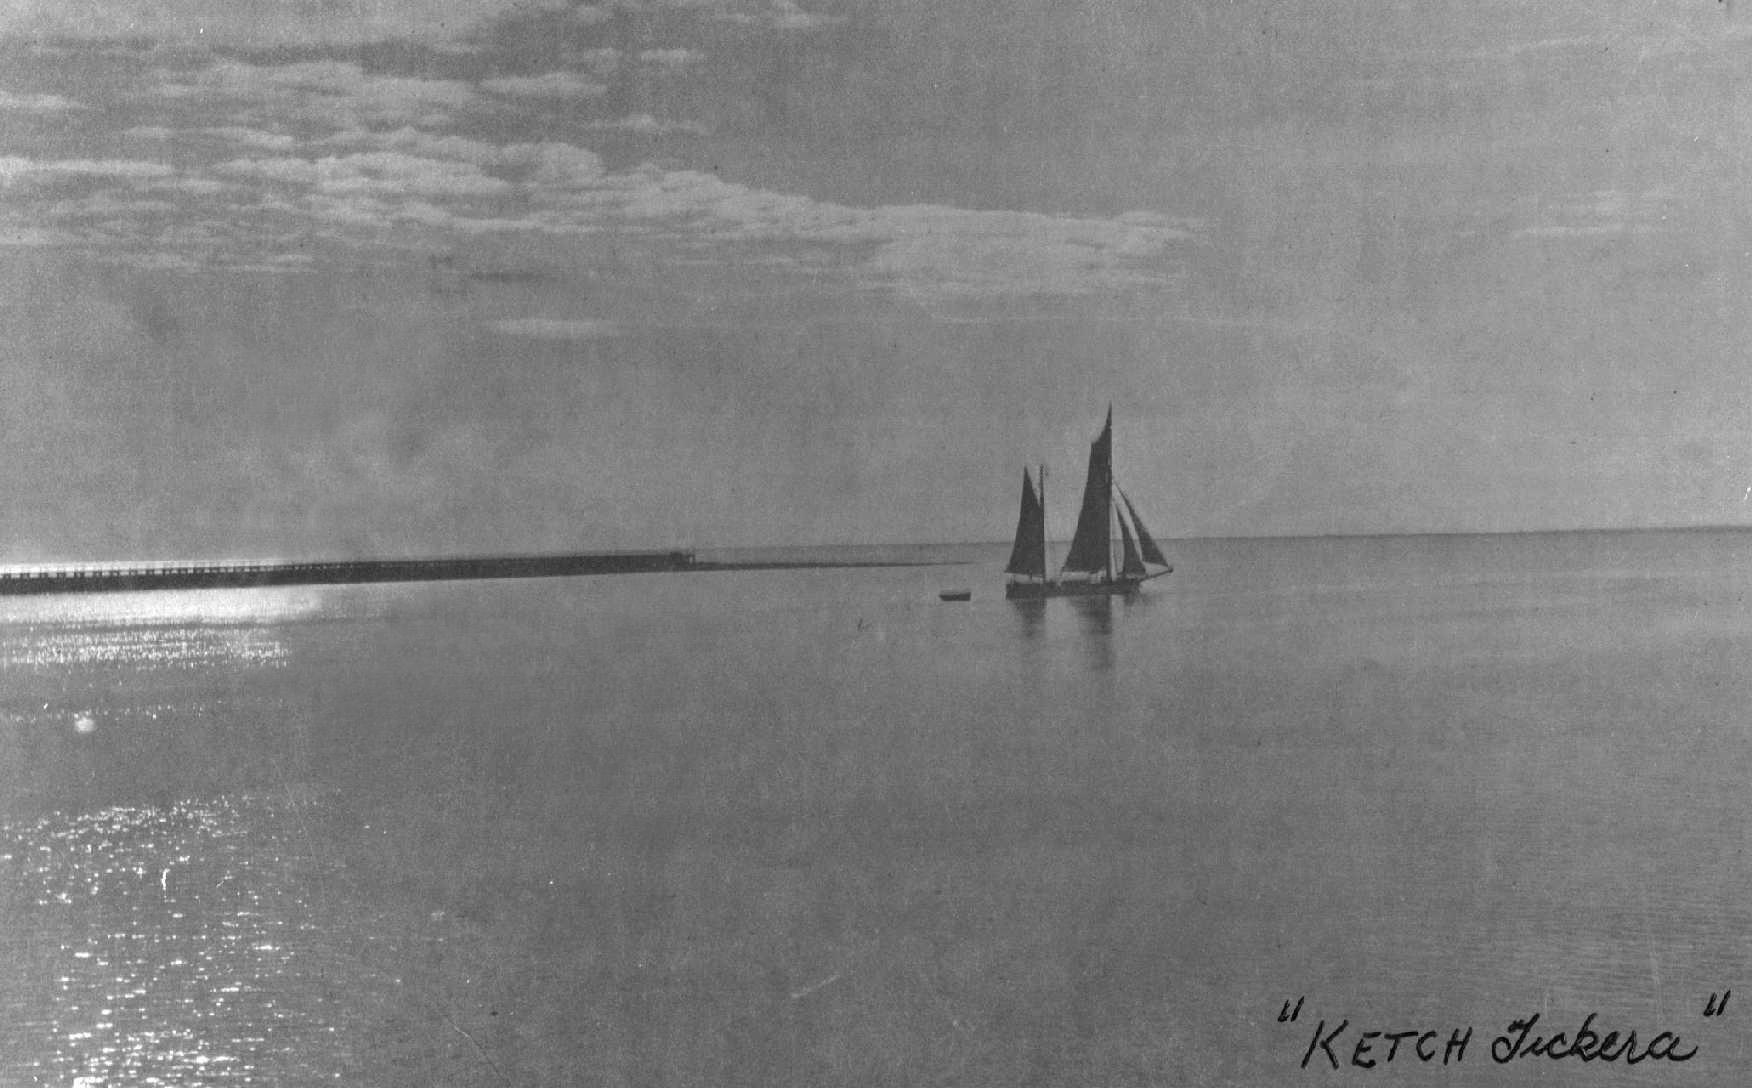 Ketch "Tickera", built in 1910 by Taylor & Hamilton, Birkenhead, SA.  She had an auxiliary engine fitted in 1923 of 18 bhp & 5 knots.  Owned by Walter Dorey until 1919 when she was owned by Edward J Wright.  In 1925 by J Heritage, by 1941 by R.M. Crouch &